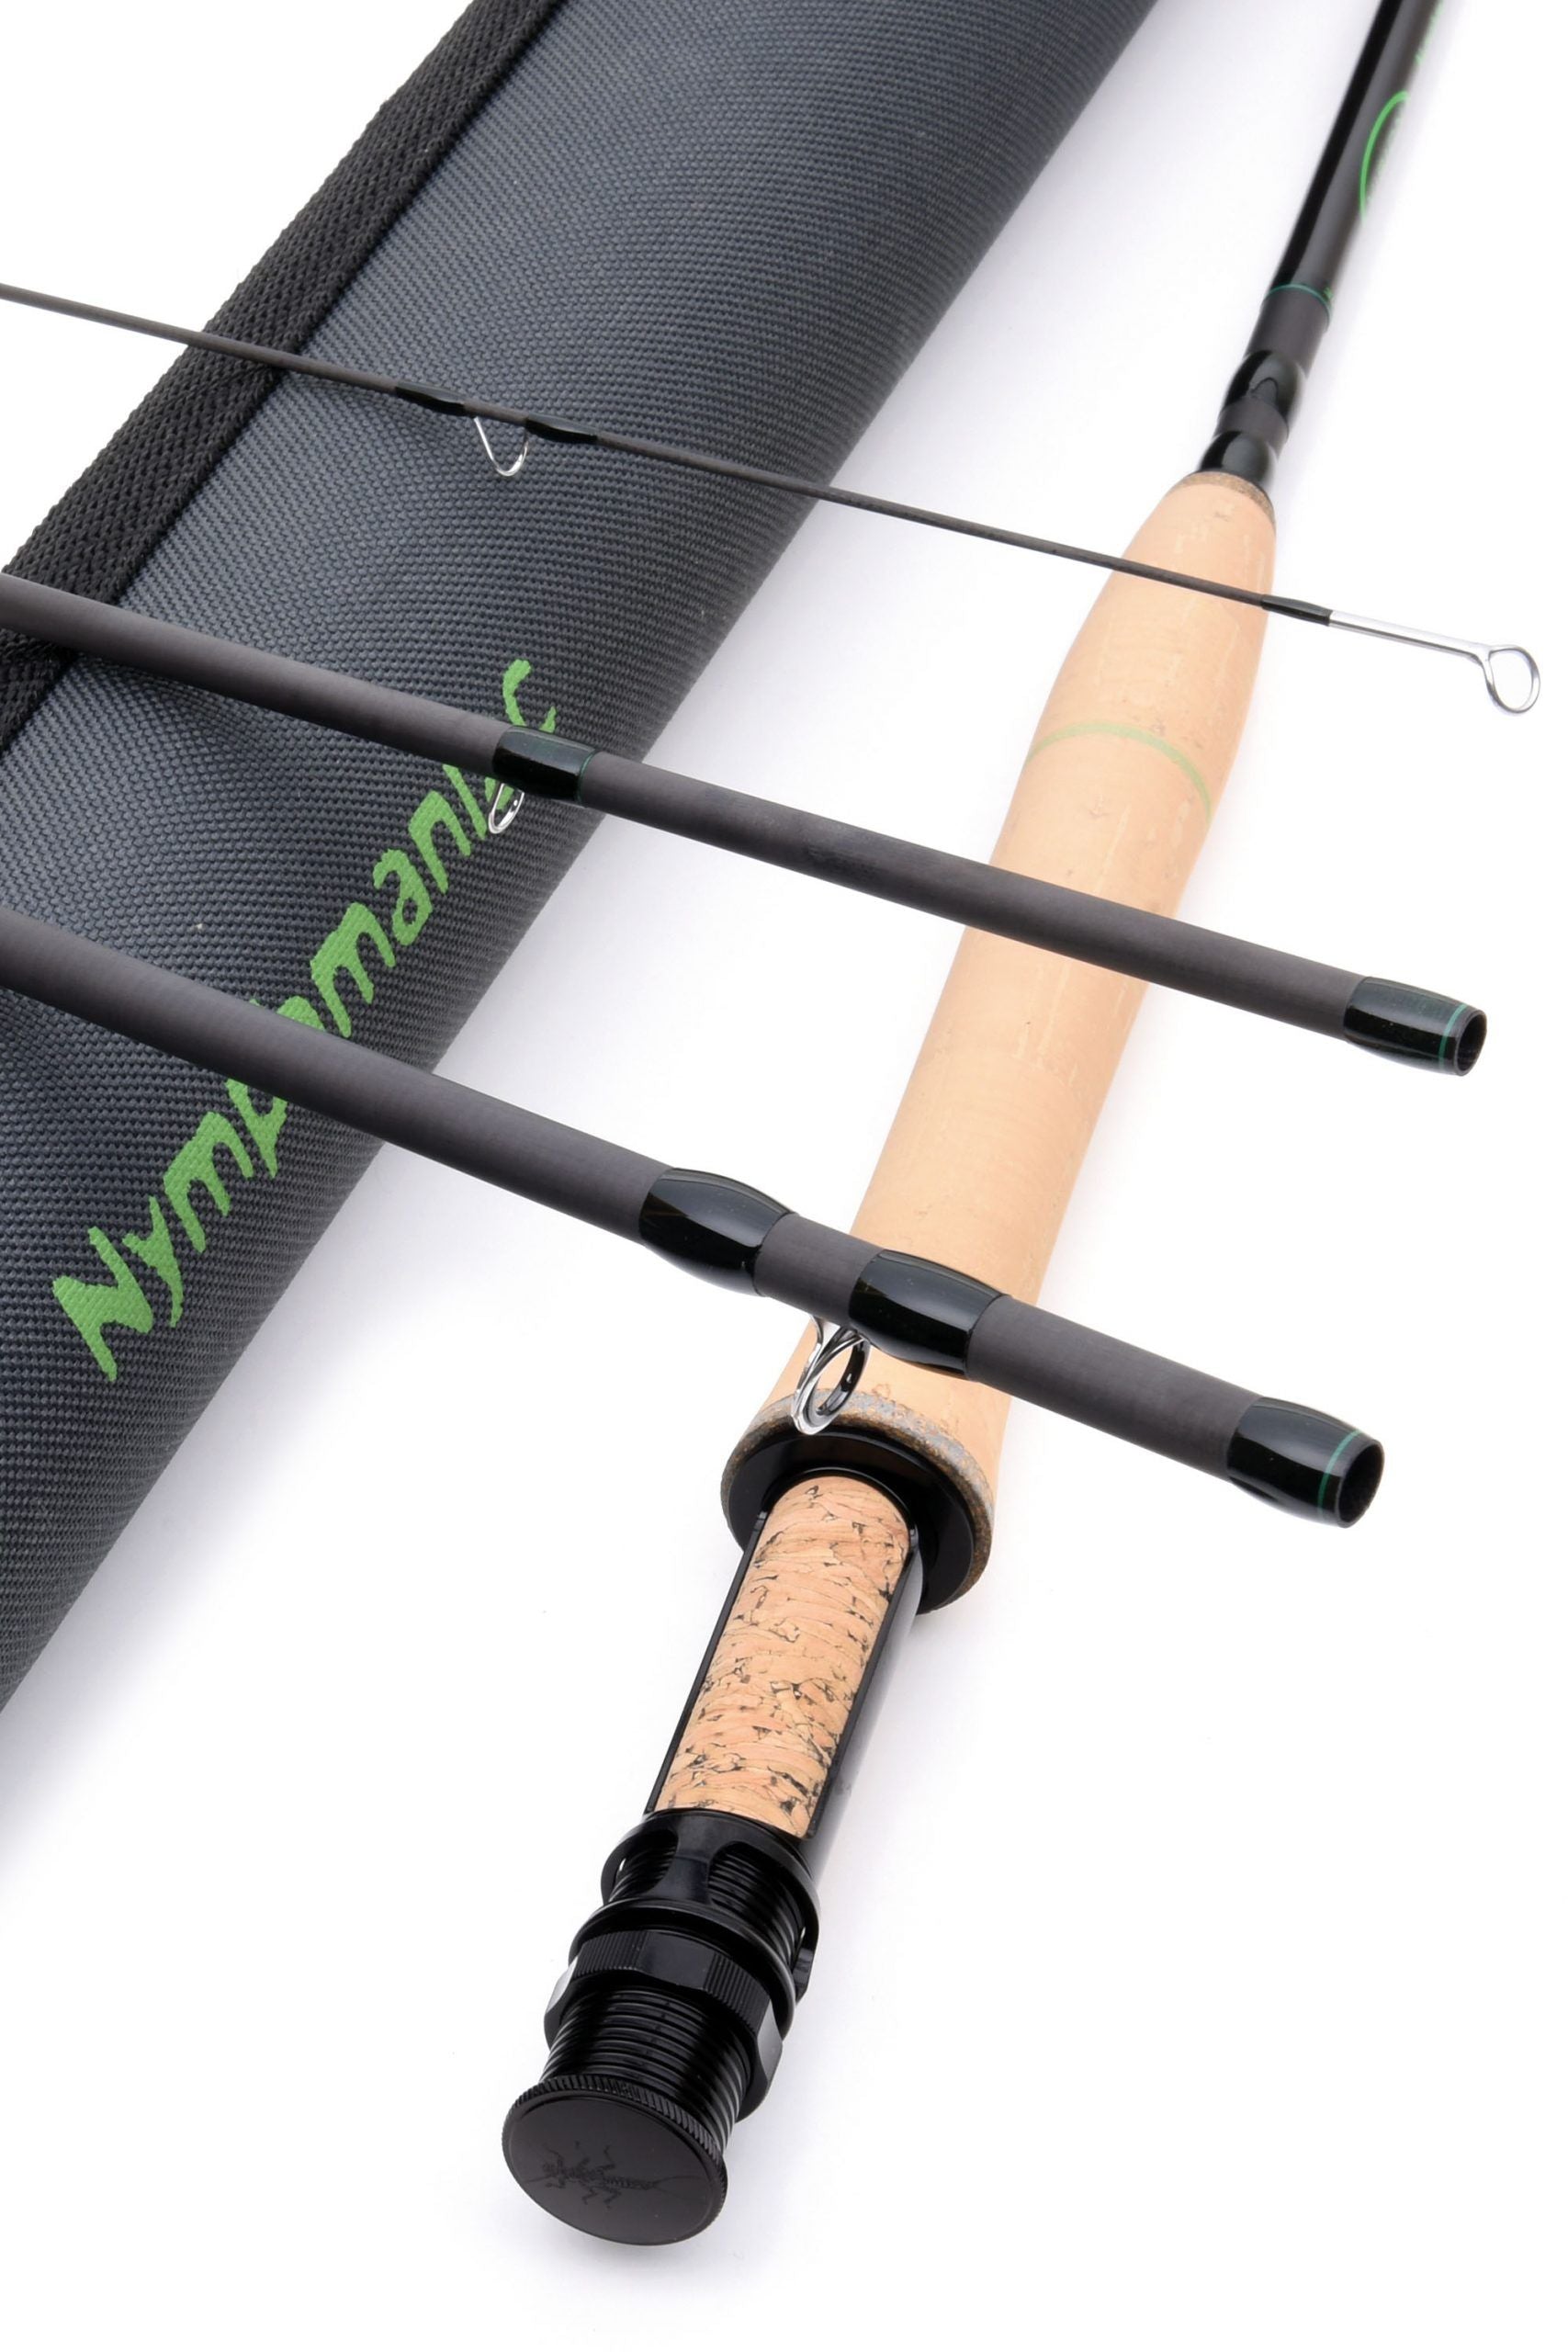 VISION NYMPHMANIAC FLY RODS  - SAVE £100 OFF RRP!